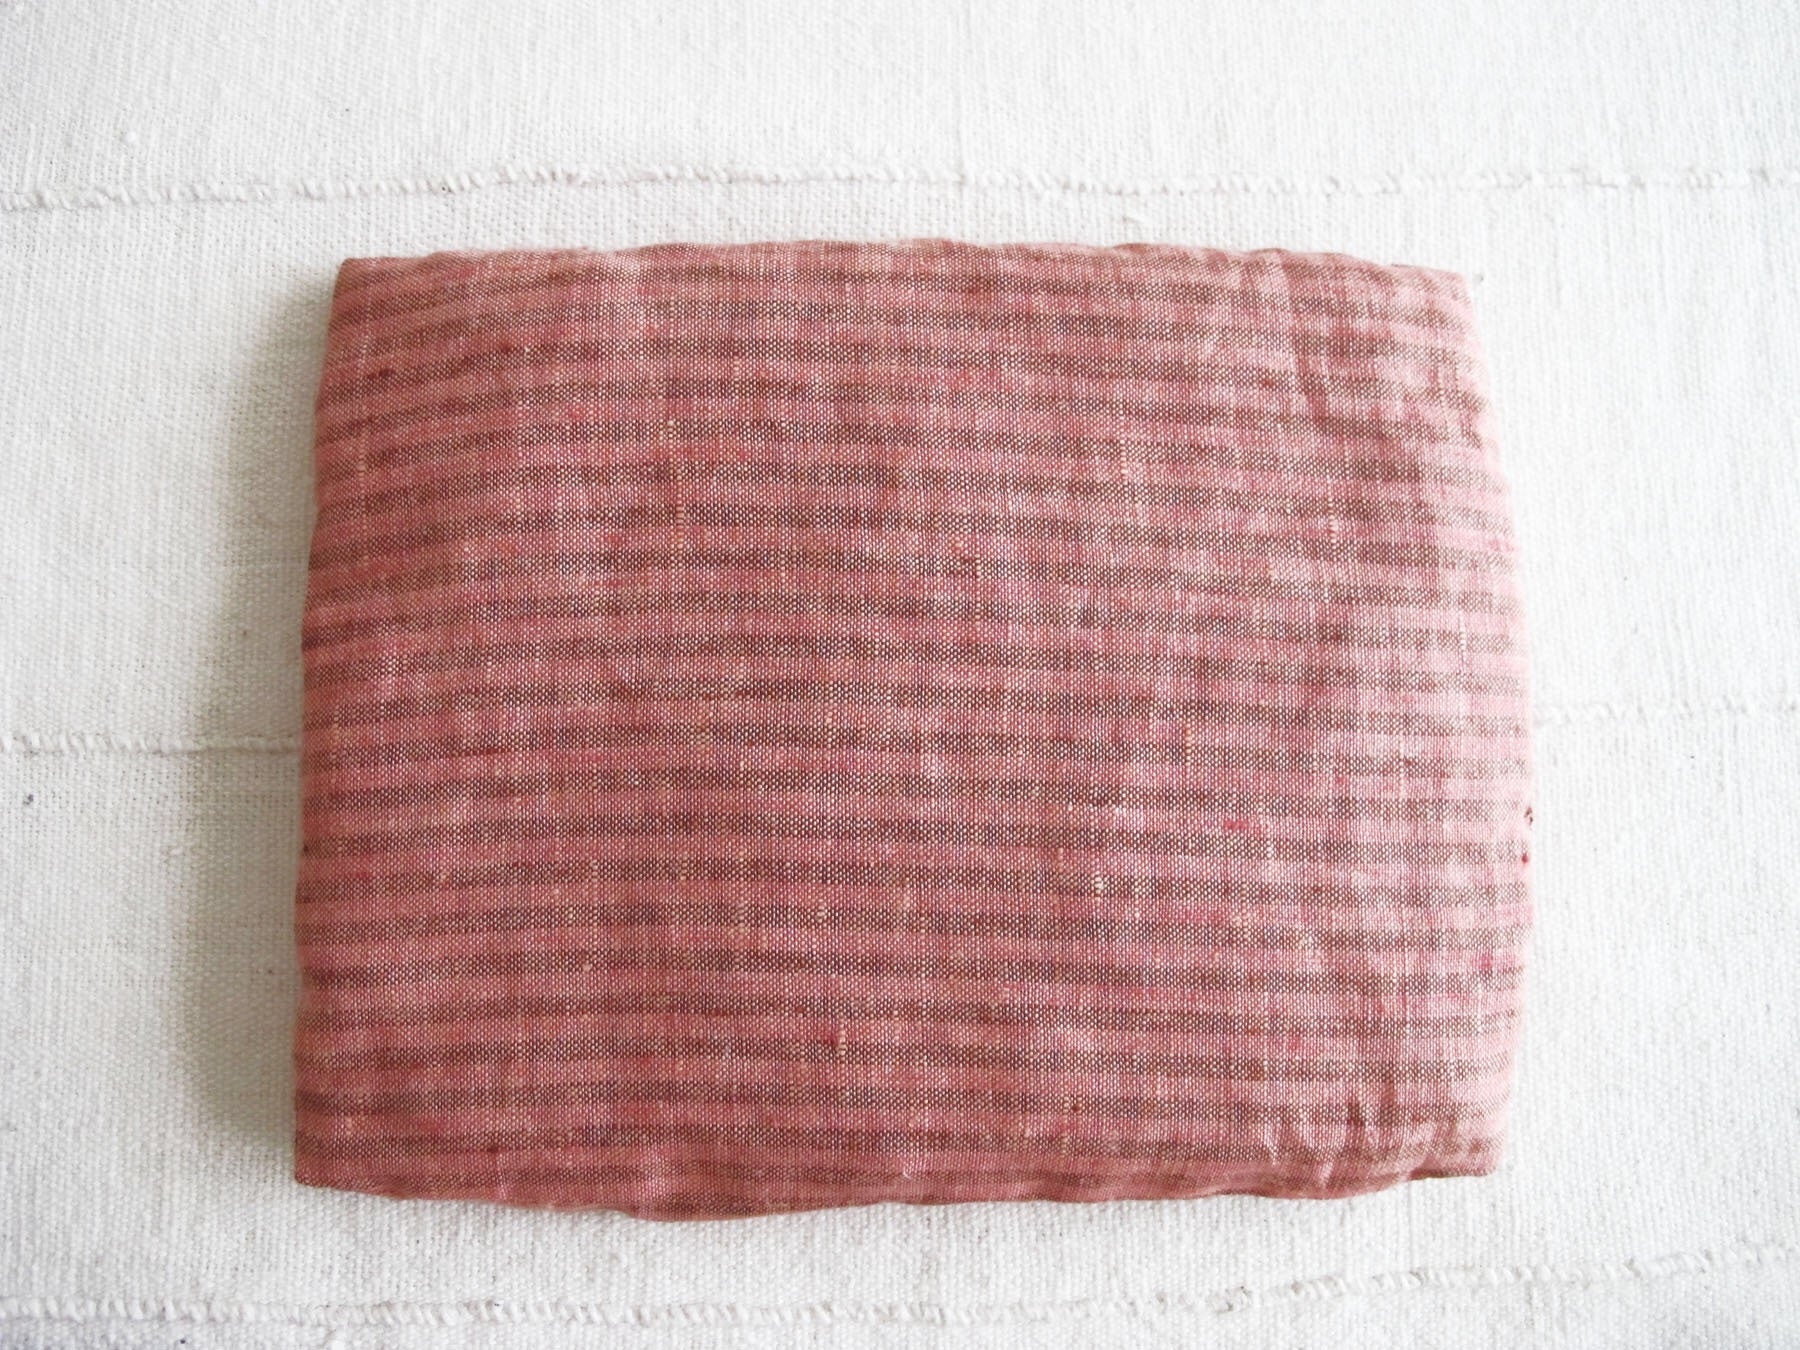 WARM/COOL PILLOW, cherry pit filling